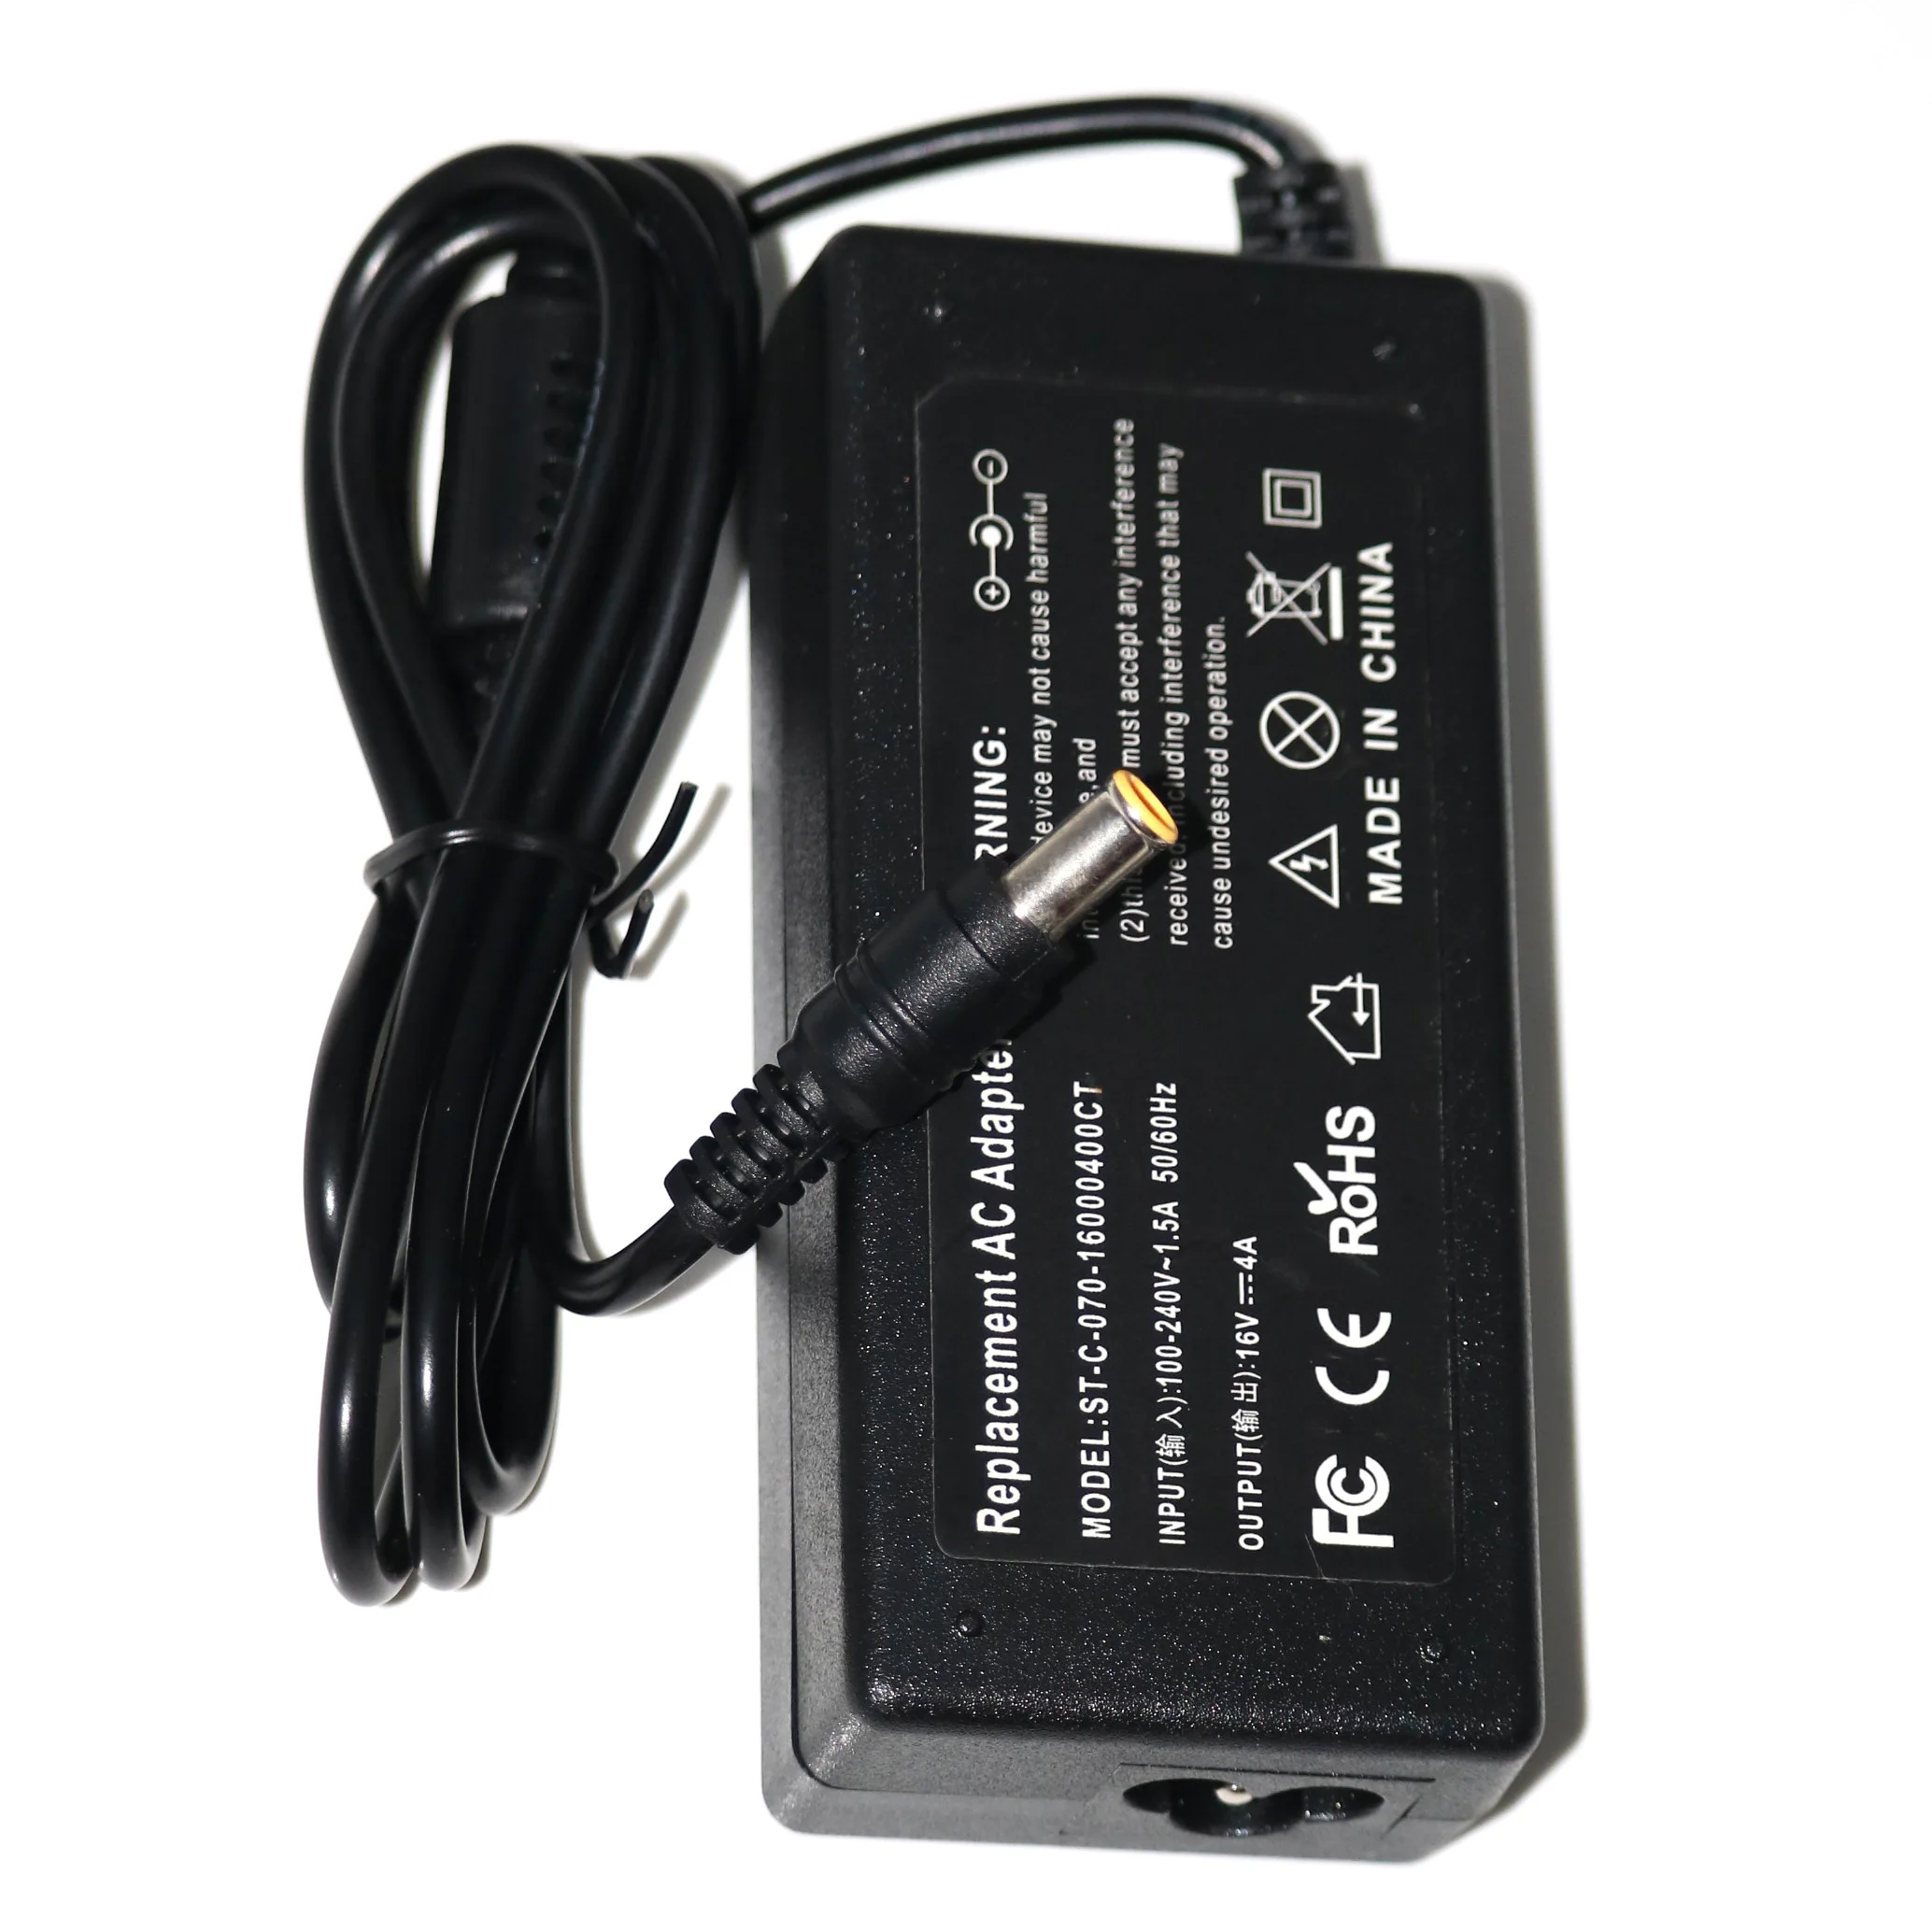 

16V 4A 6.5*4.4mm AC adapter laptop charger power supply for Sony Vaio PCG-4A1L PCG-4B1L PCG-4F1L PCG-4F2L PCG-4G1L PCG-4G2L PCG-